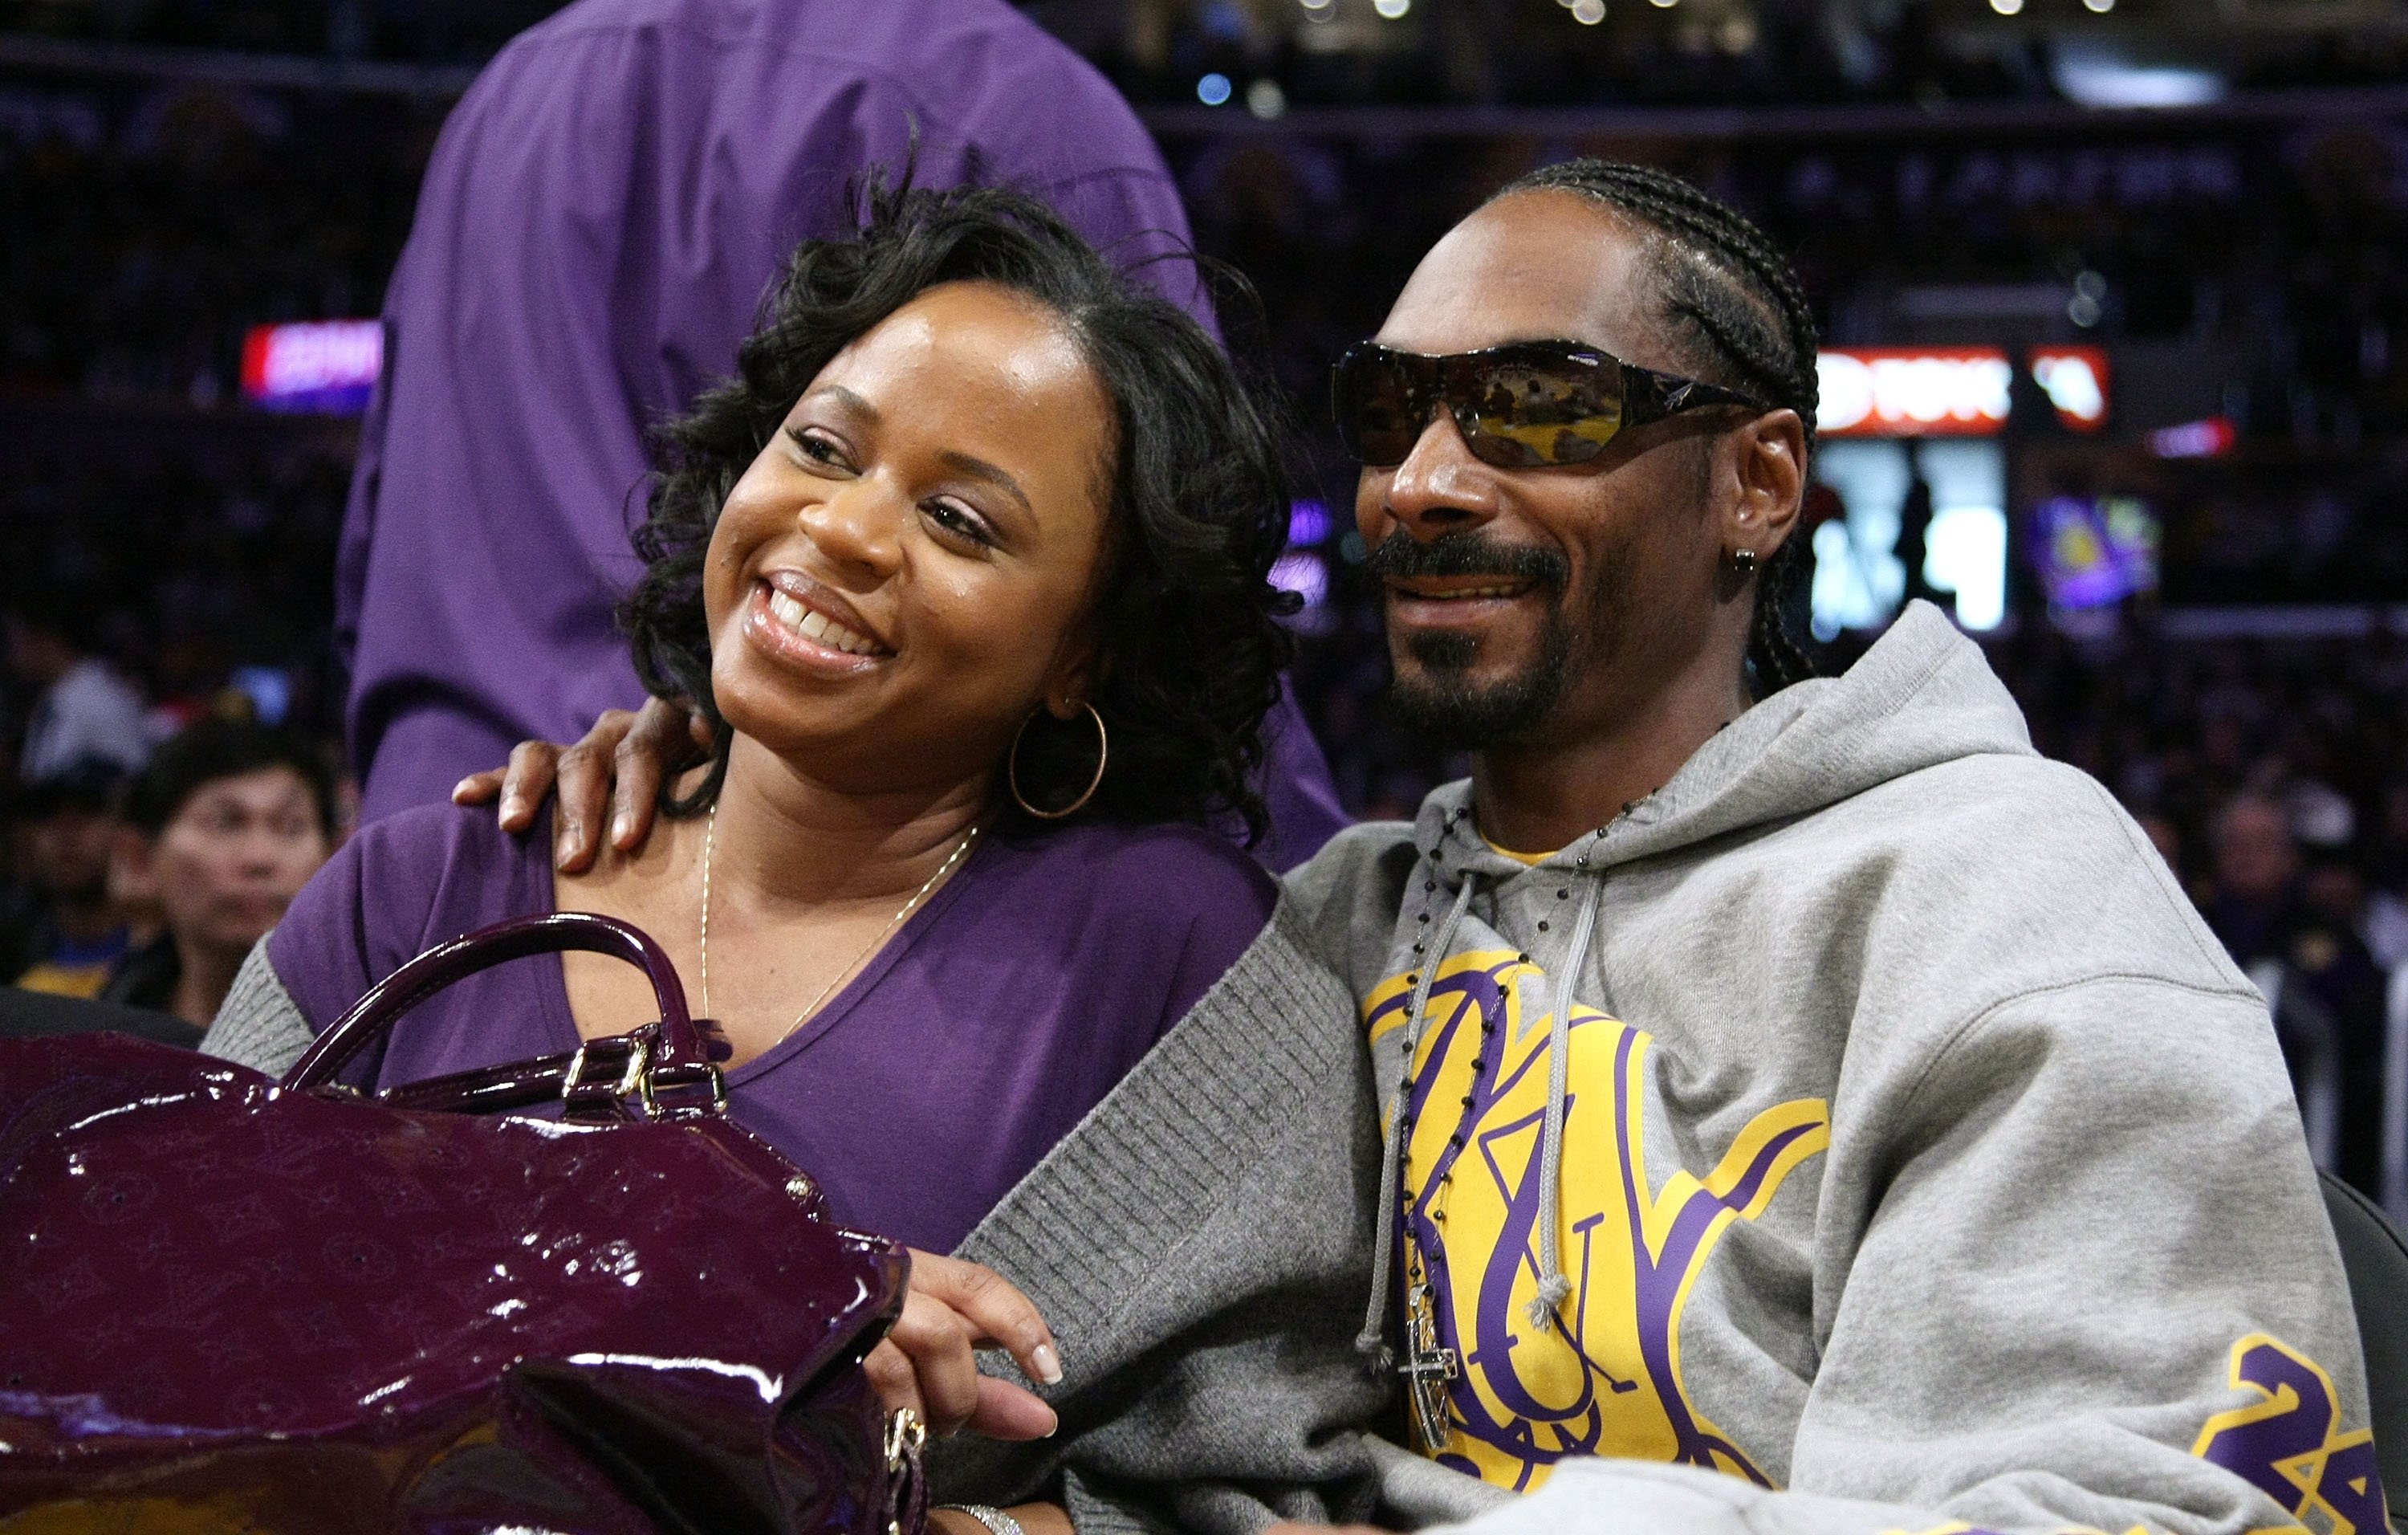 Snoop Dogg and Shante Broadus attend the Los Angeles Lakers vs Boston Celtics game on December 25, 2008 | Photo: Getty Images